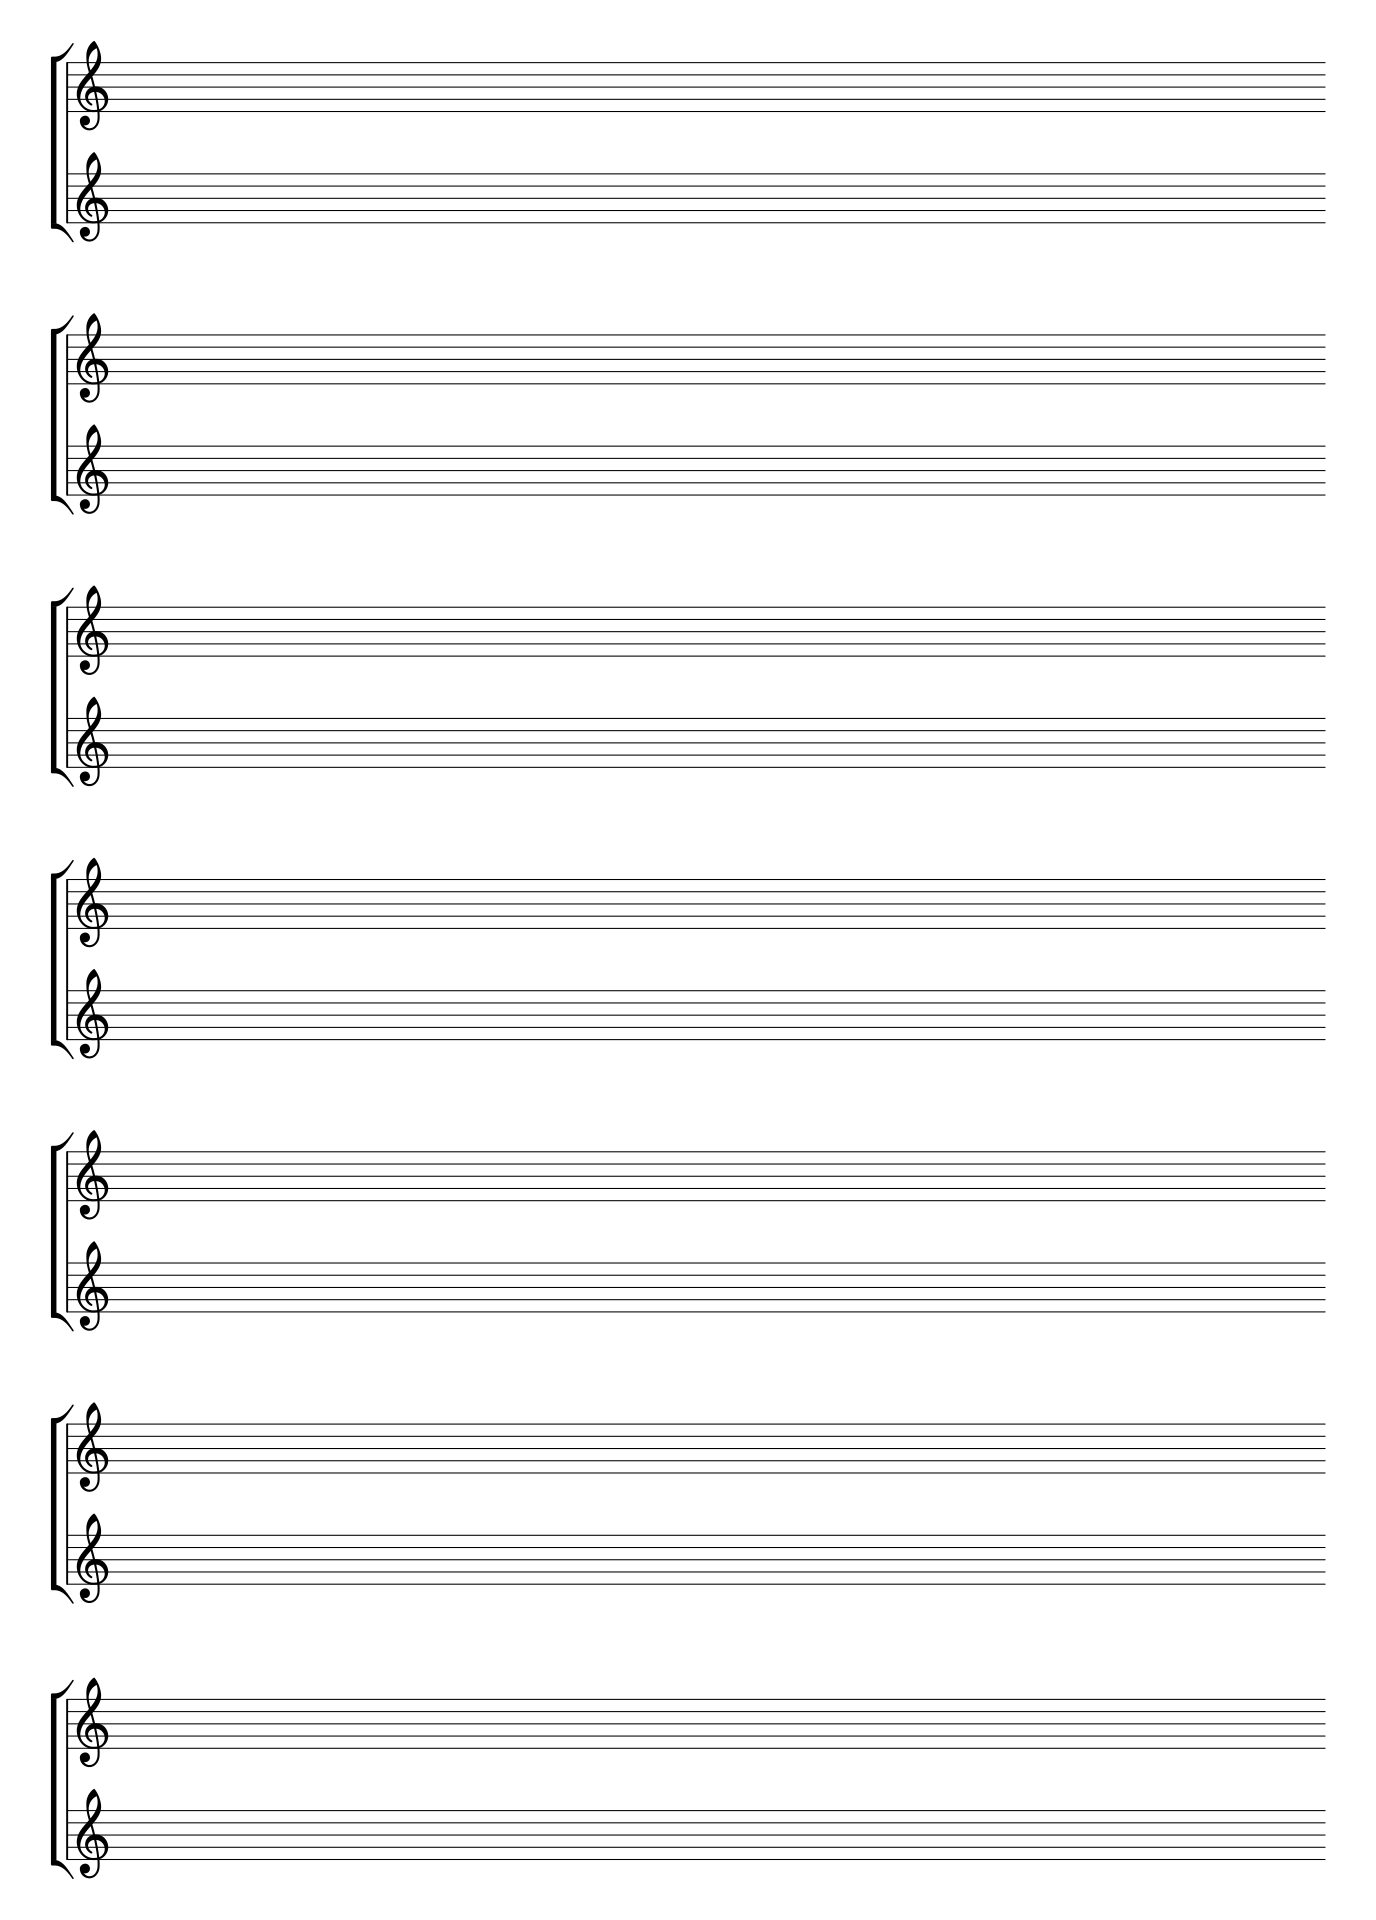 6 Best Images of Printable Blank Note Sheets Music Note Sheets Blank